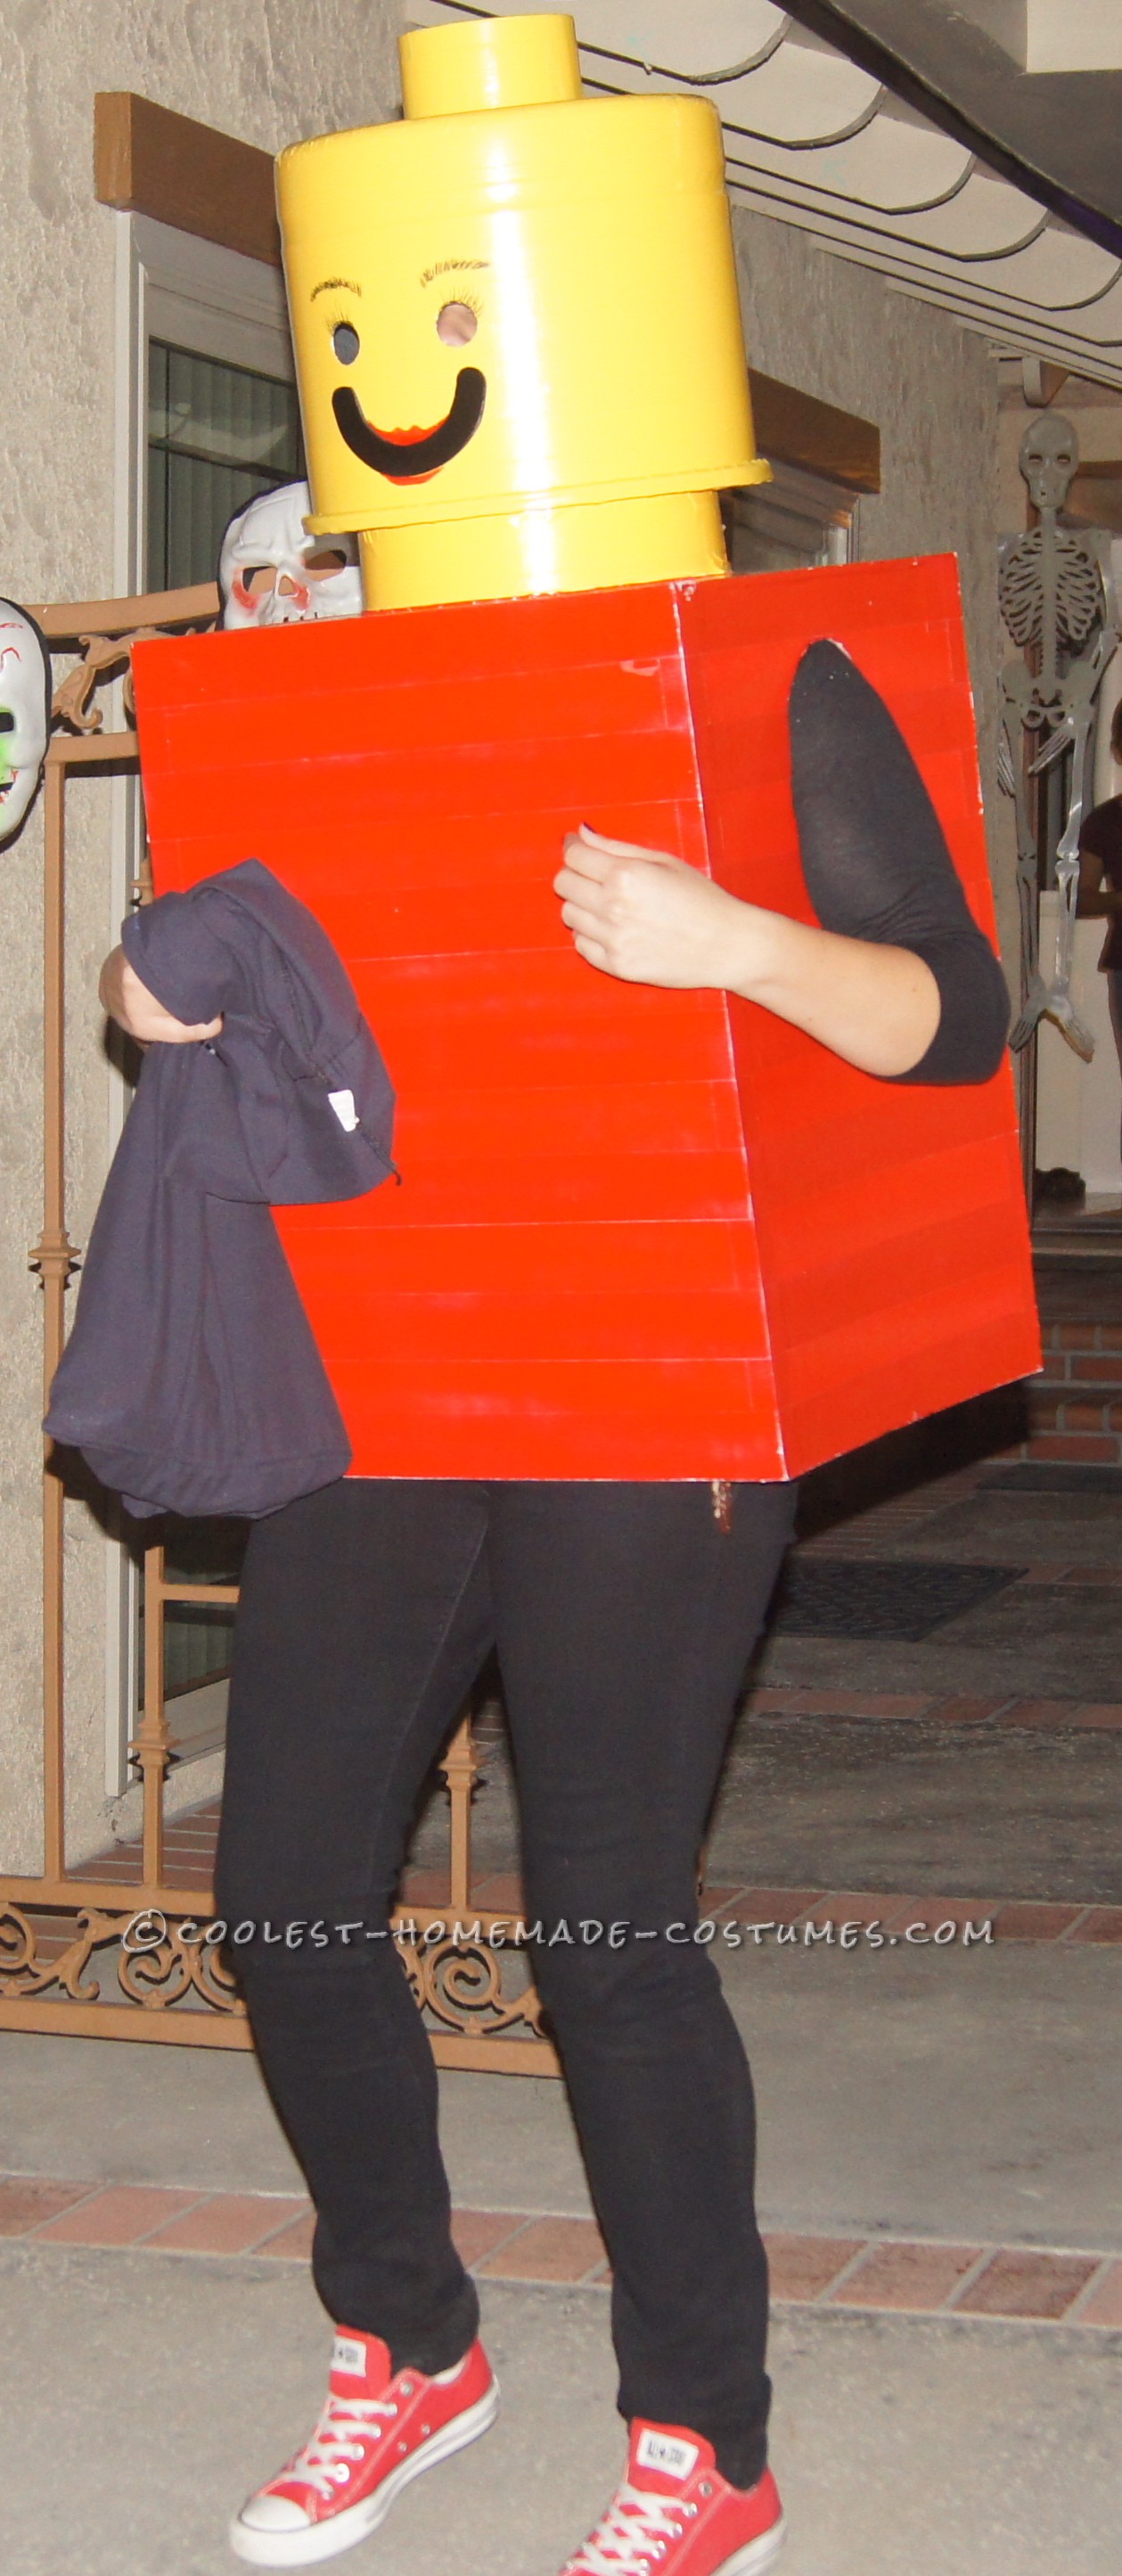 Cool Homemade Lego Lady Costume